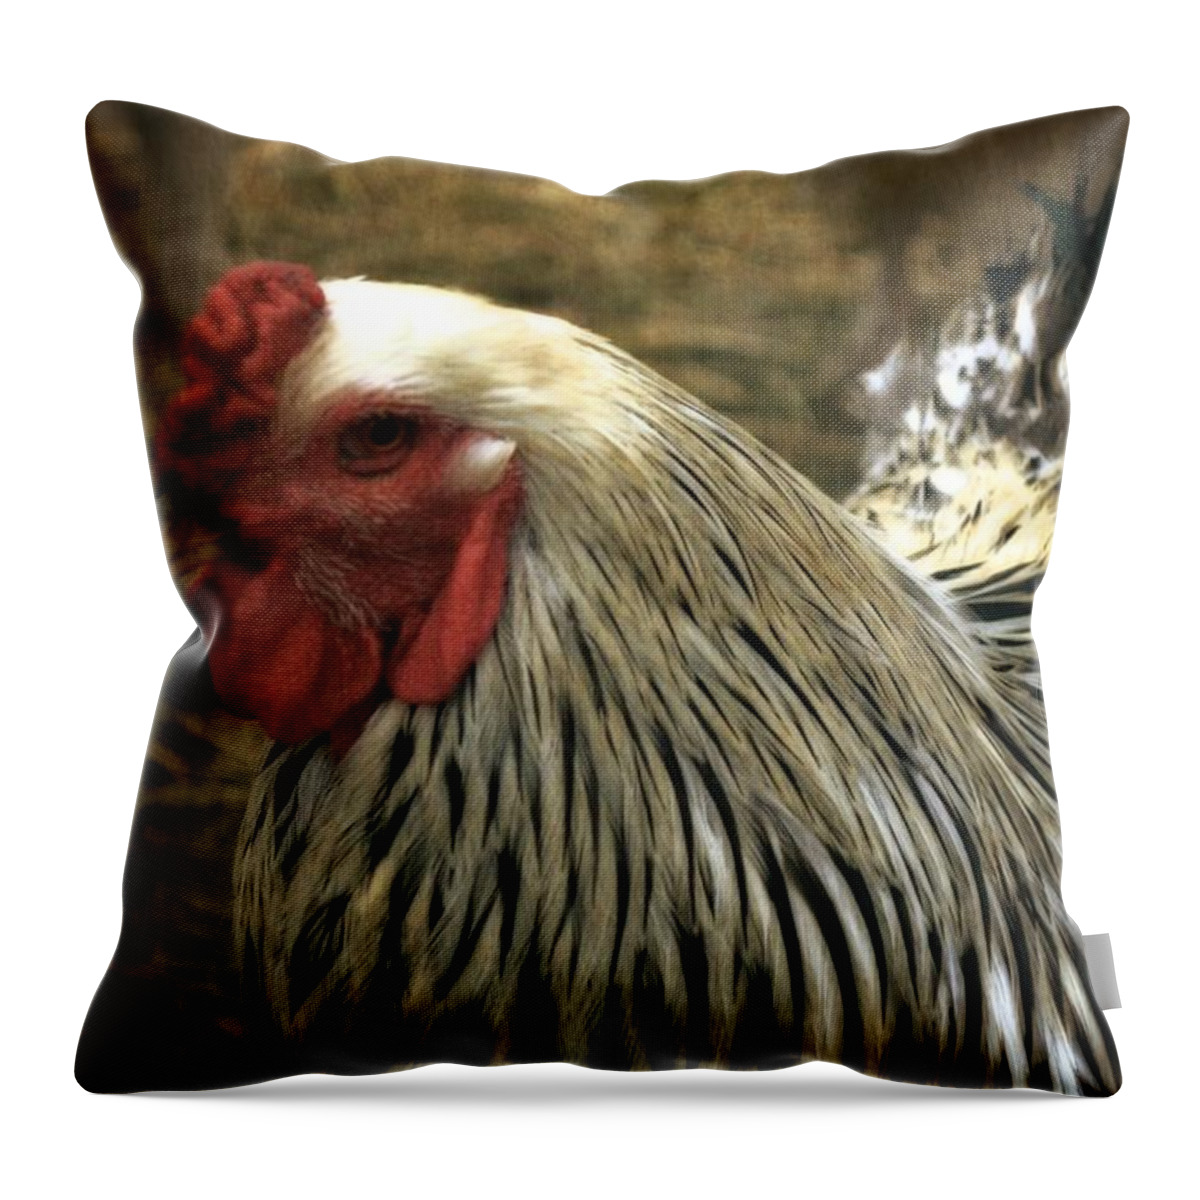 Red Throw Pillow featuring the photograph On the Farm by Michelle Calkins